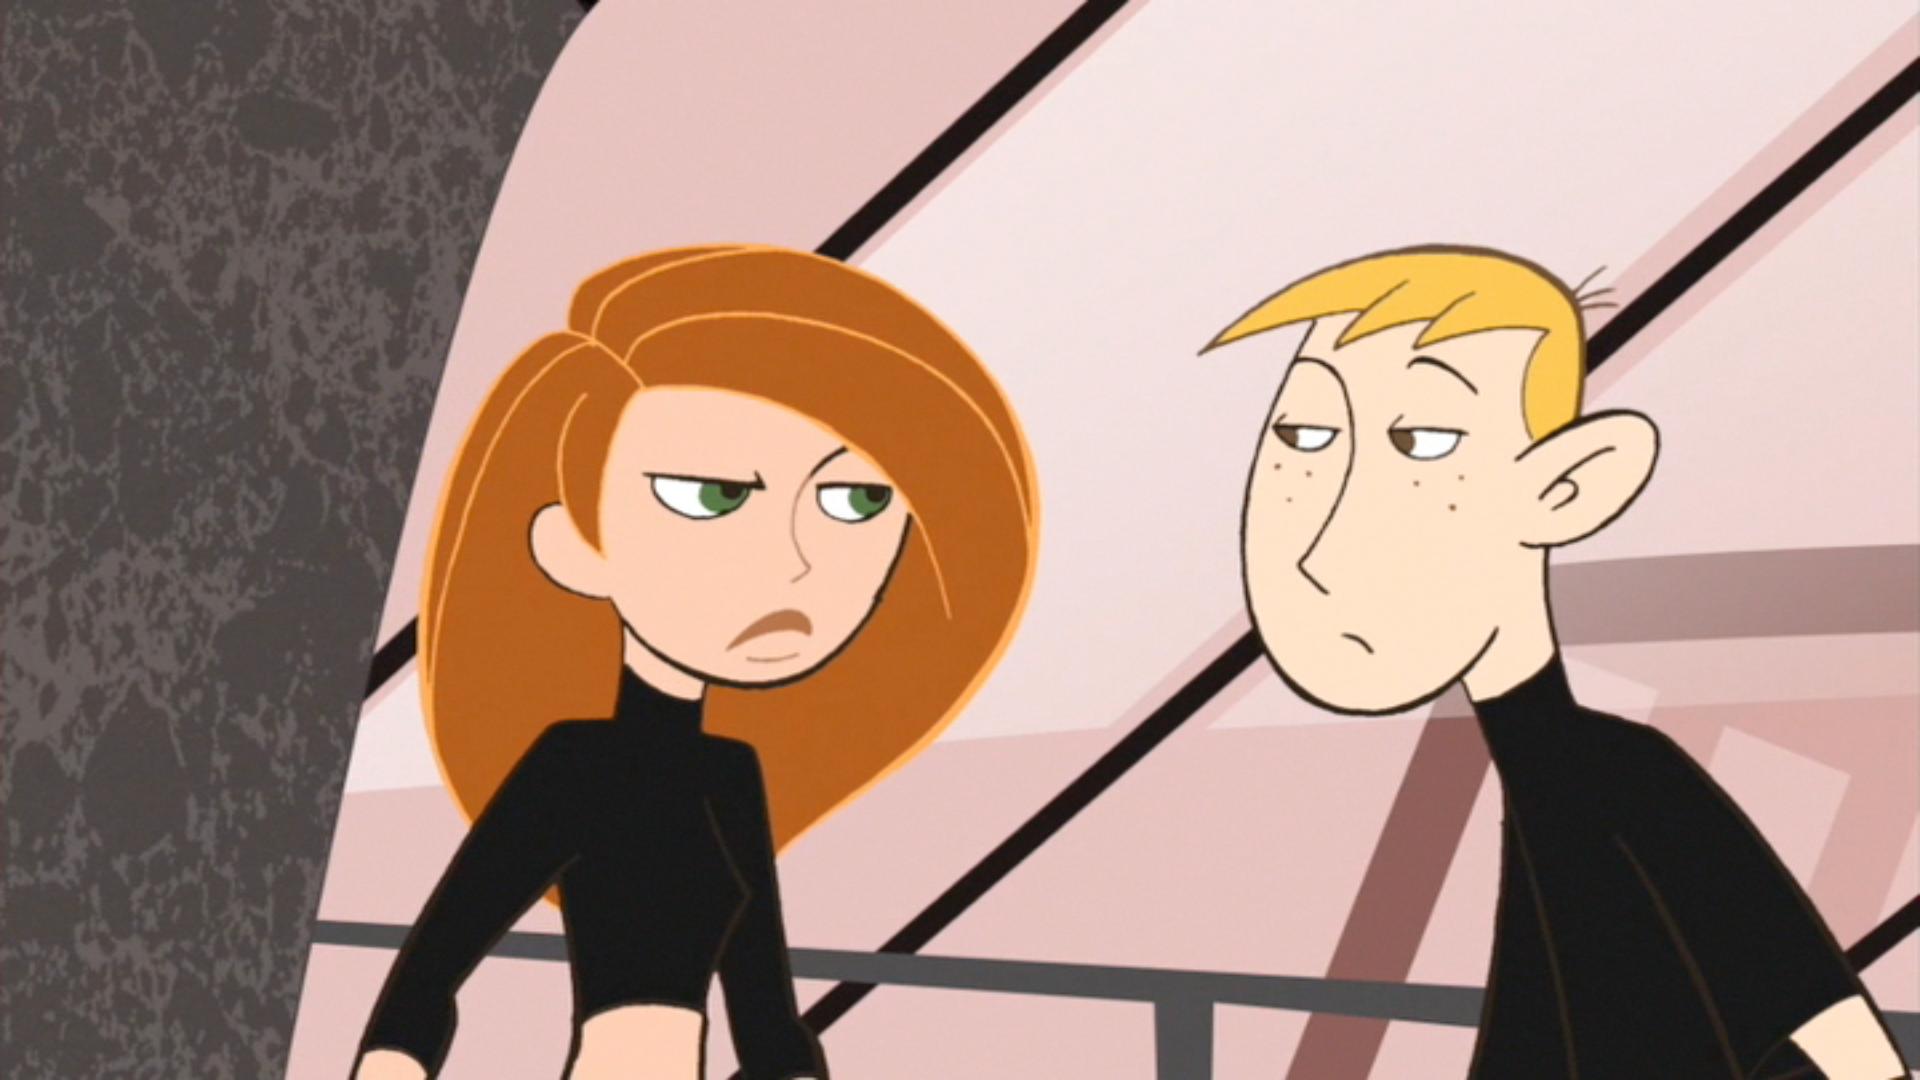 Ron the Man Screen Captures .:::. Kim Possible Fan World